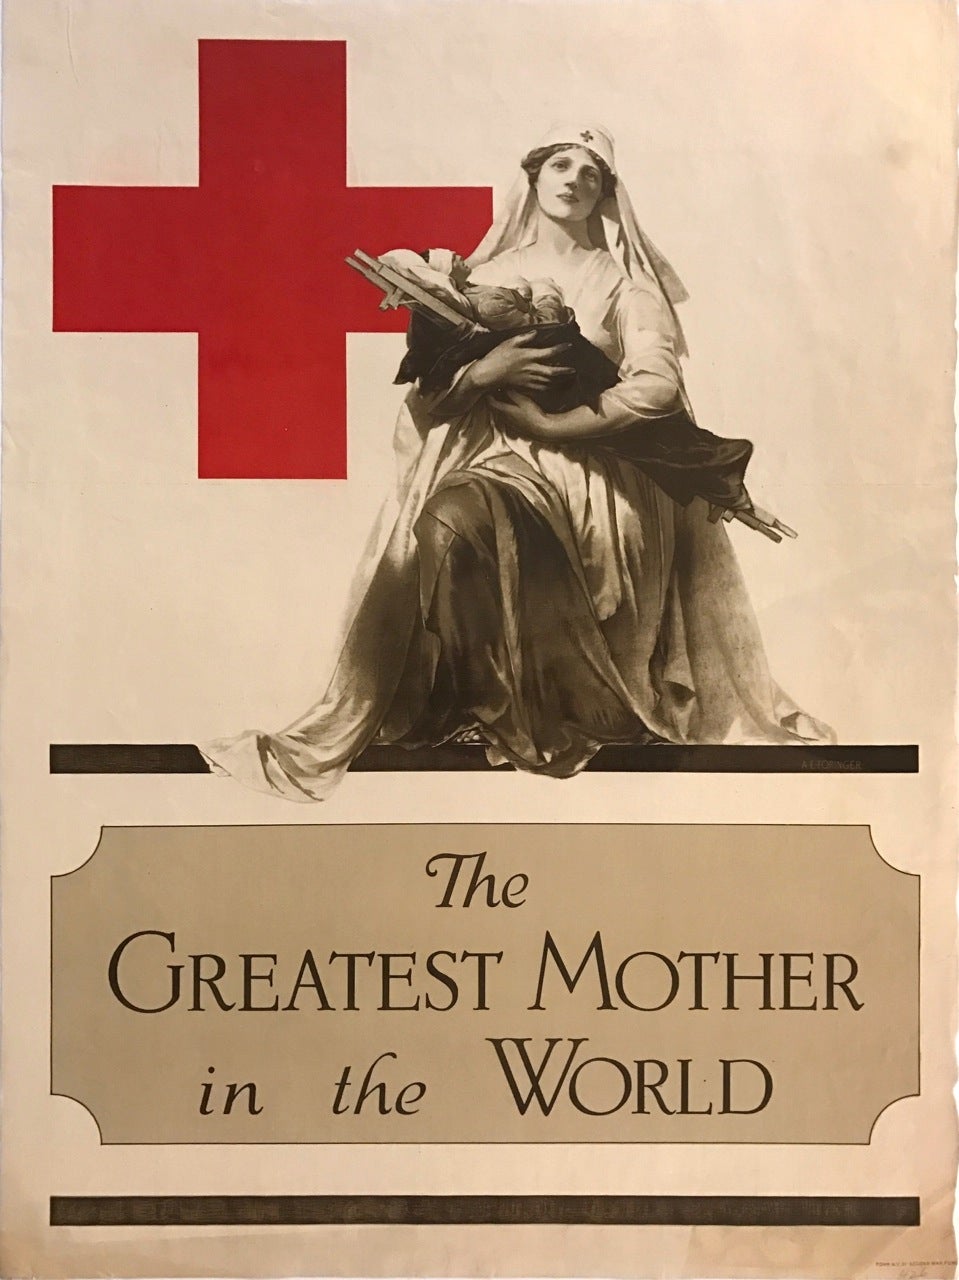 The Red Cross: A History of This Remarkable Movement in the